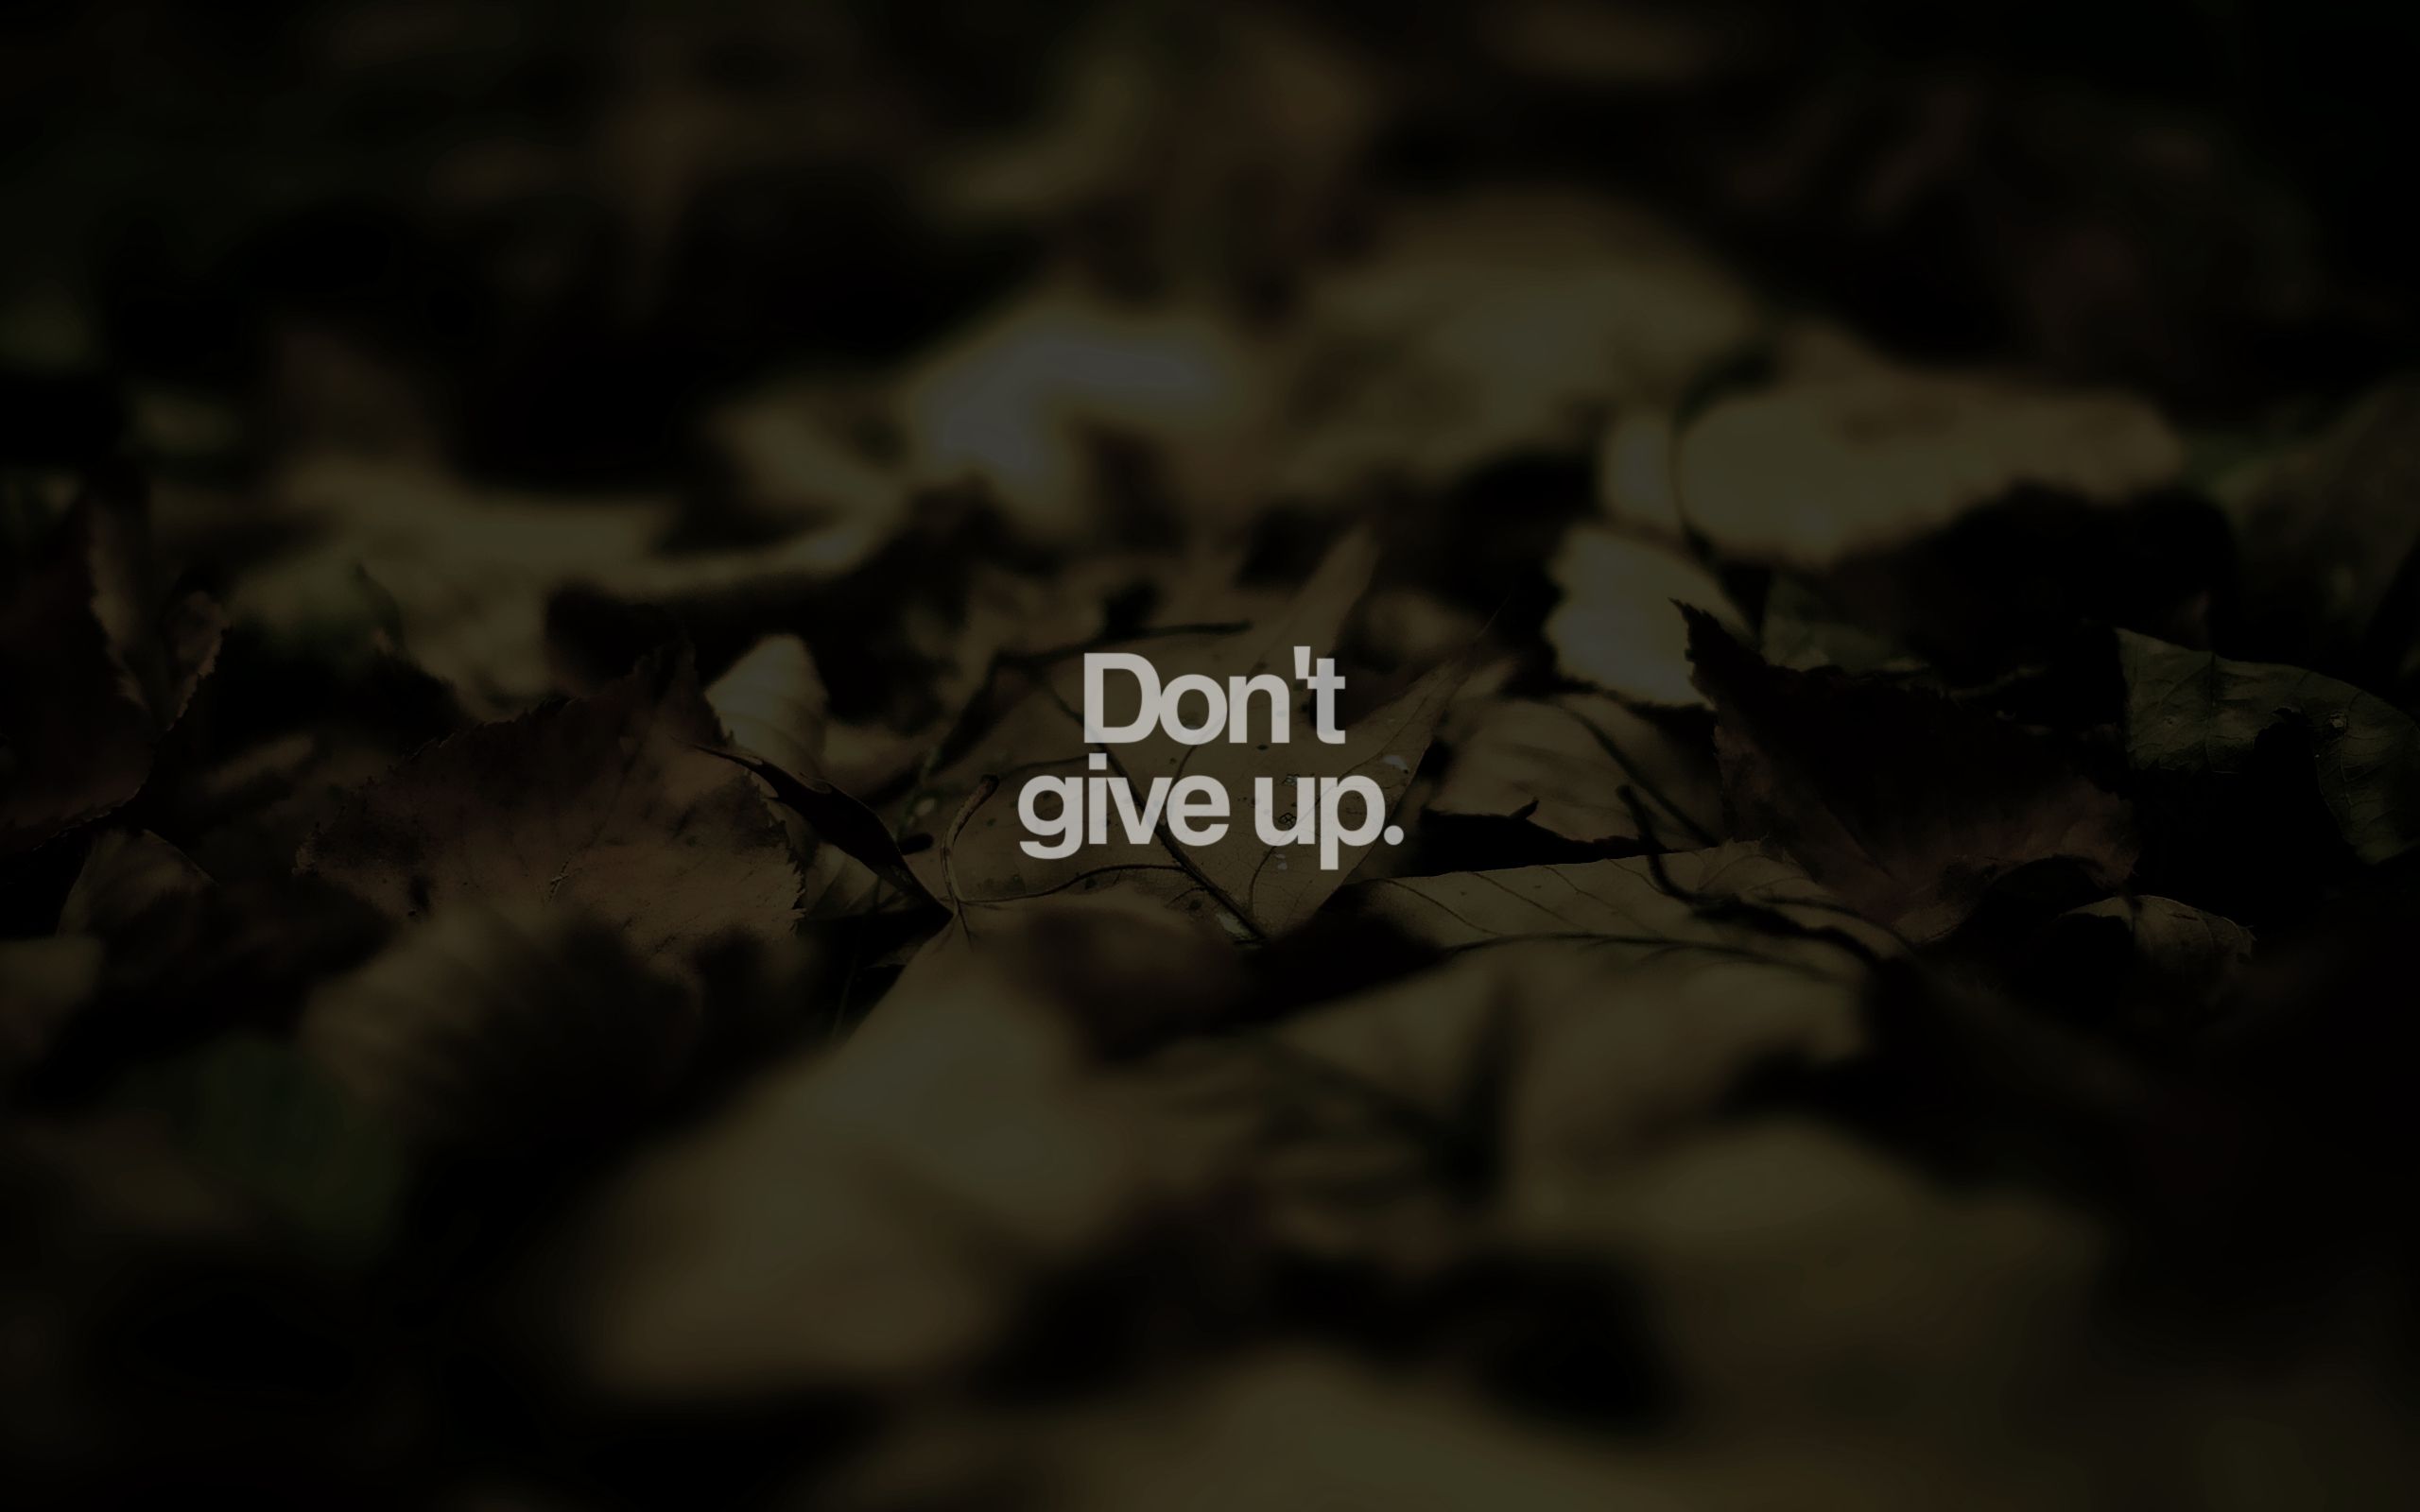 Don't Give Up Wallpaper. Give Thanks Wallpaper, Never Give in Wallpaper and Never Give Up Wallpaper